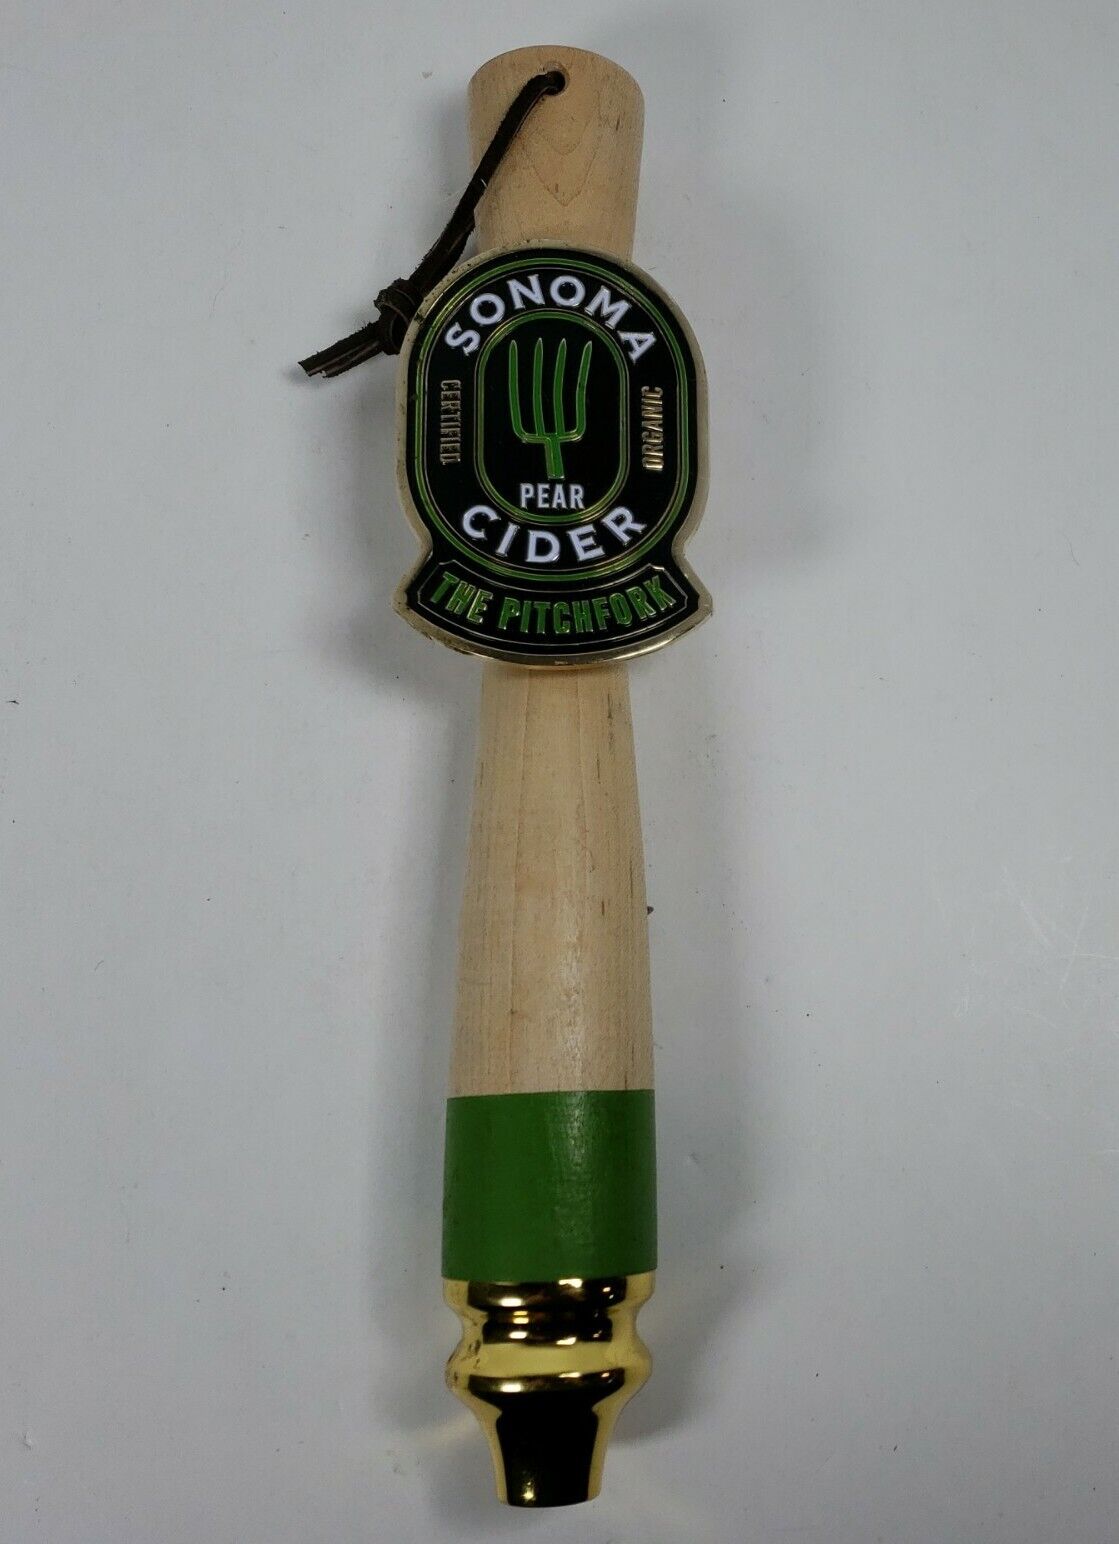 Sonoma Pear Cider \'The Pitchfork\' Wooden Beer Tap Handle Certified Organic 